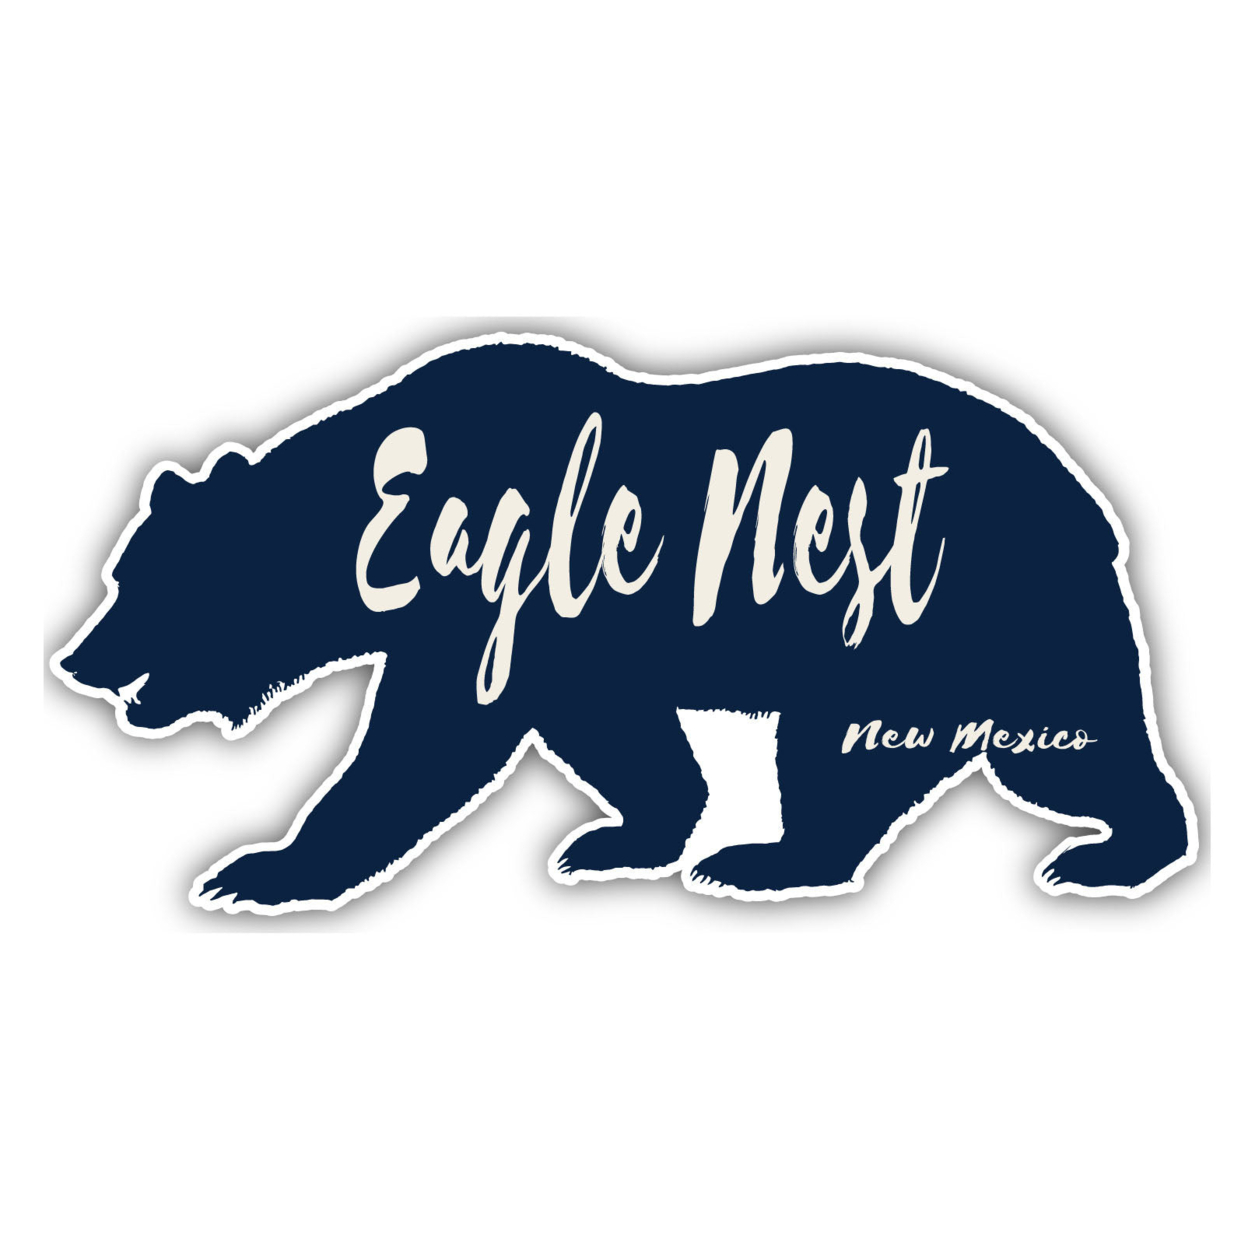 Eagle Nest New Mexico Souvenir Decorative Stickers (Choose Theme And Size) - Single Unit, 8-Inch, Great Outdoors